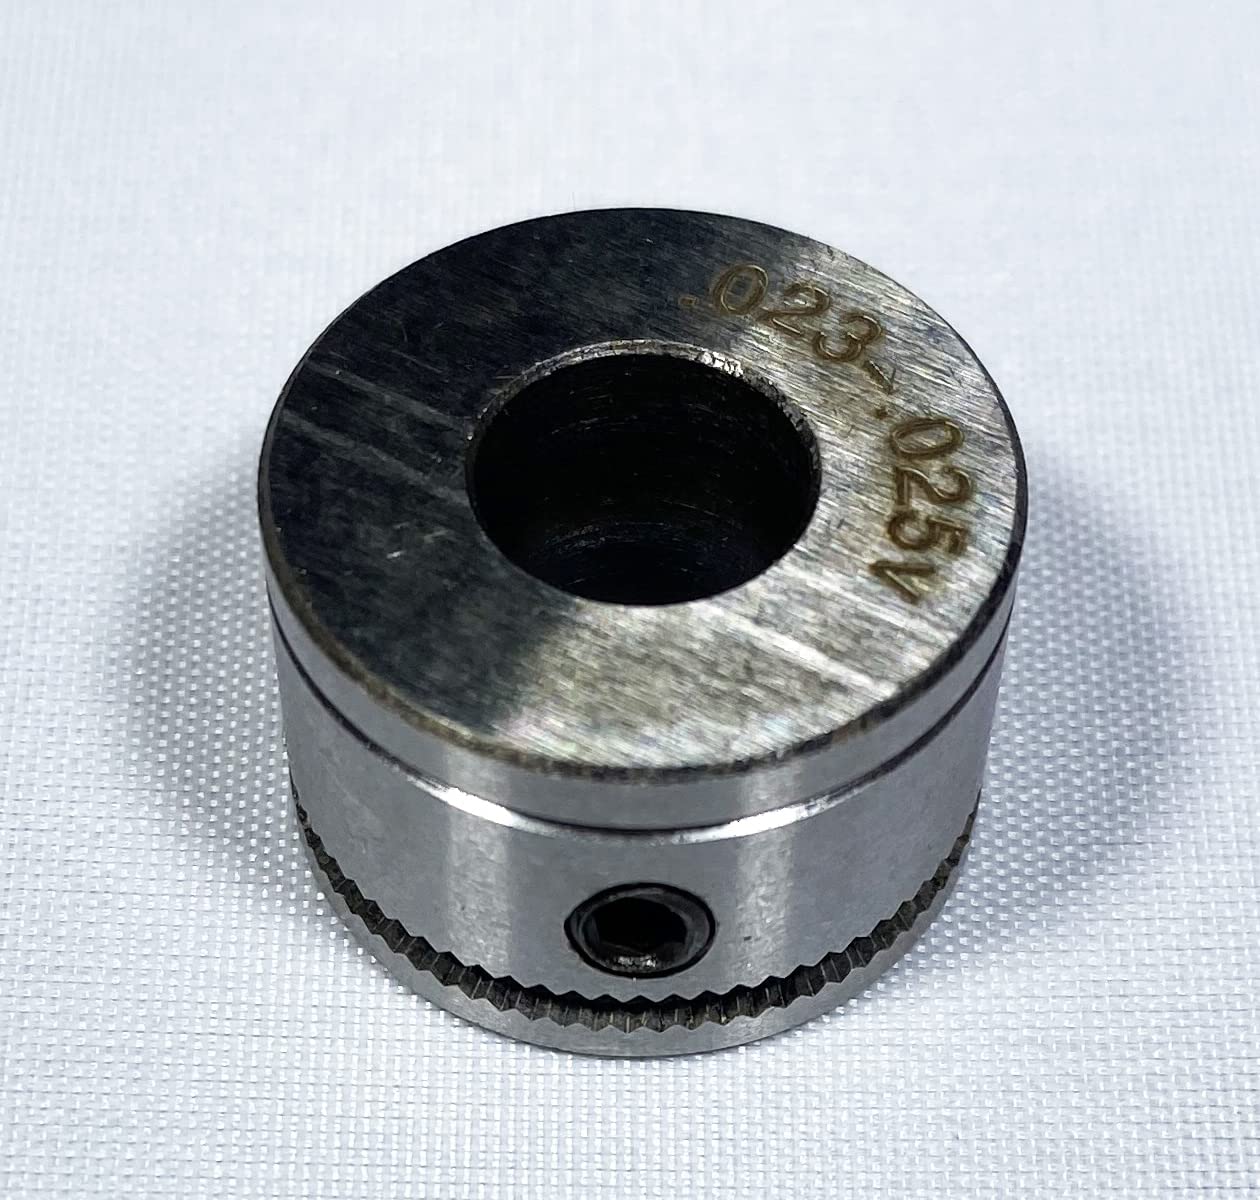 Drive Roller Replacement For Lincoln Weld Pak 100 / 100HD / 125/155 / 175HD / 3200HD/ 5000HD Welder